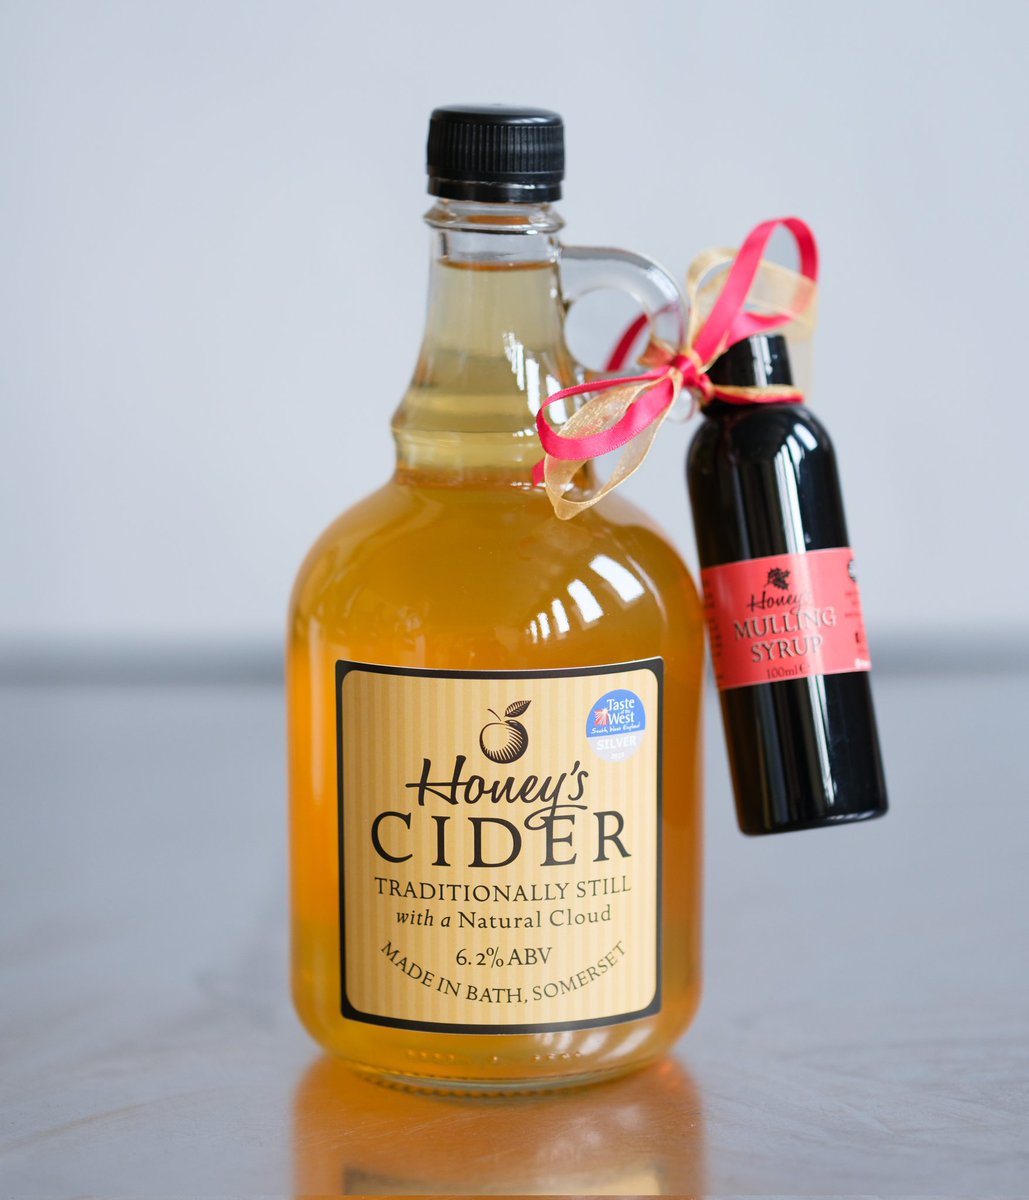 Mulled Cider Kits are back! Simply add the fruity, spiced mulling syrup to our medium dry still cider and gently warm for a delicious festive tipple! And it smells amazing too #mulledcider #mullingkit #hotcider #festivetipple #festivedrink #festivetreat #festivescents